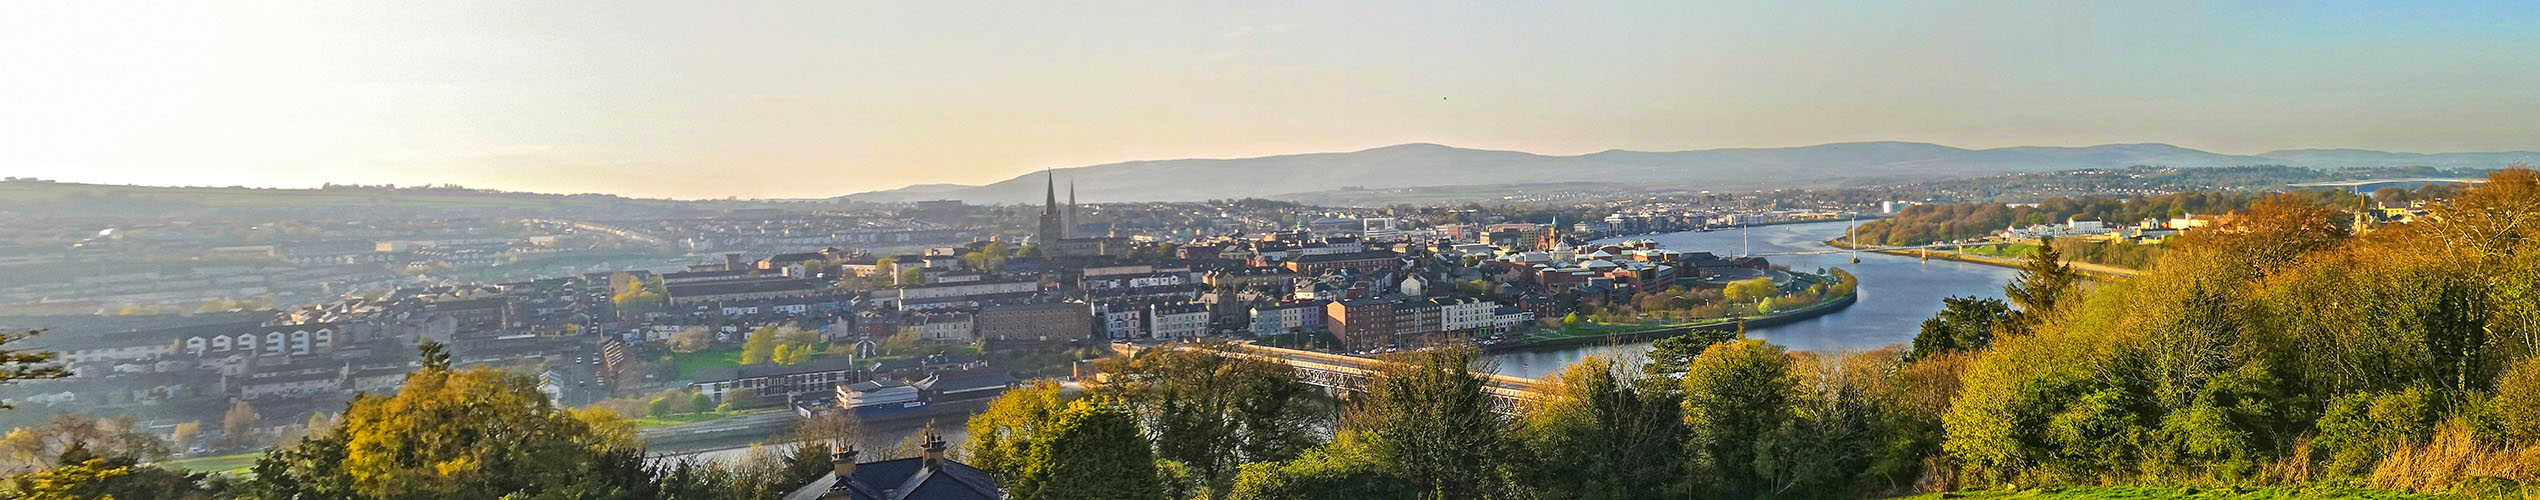 View of derry from on top of a hill